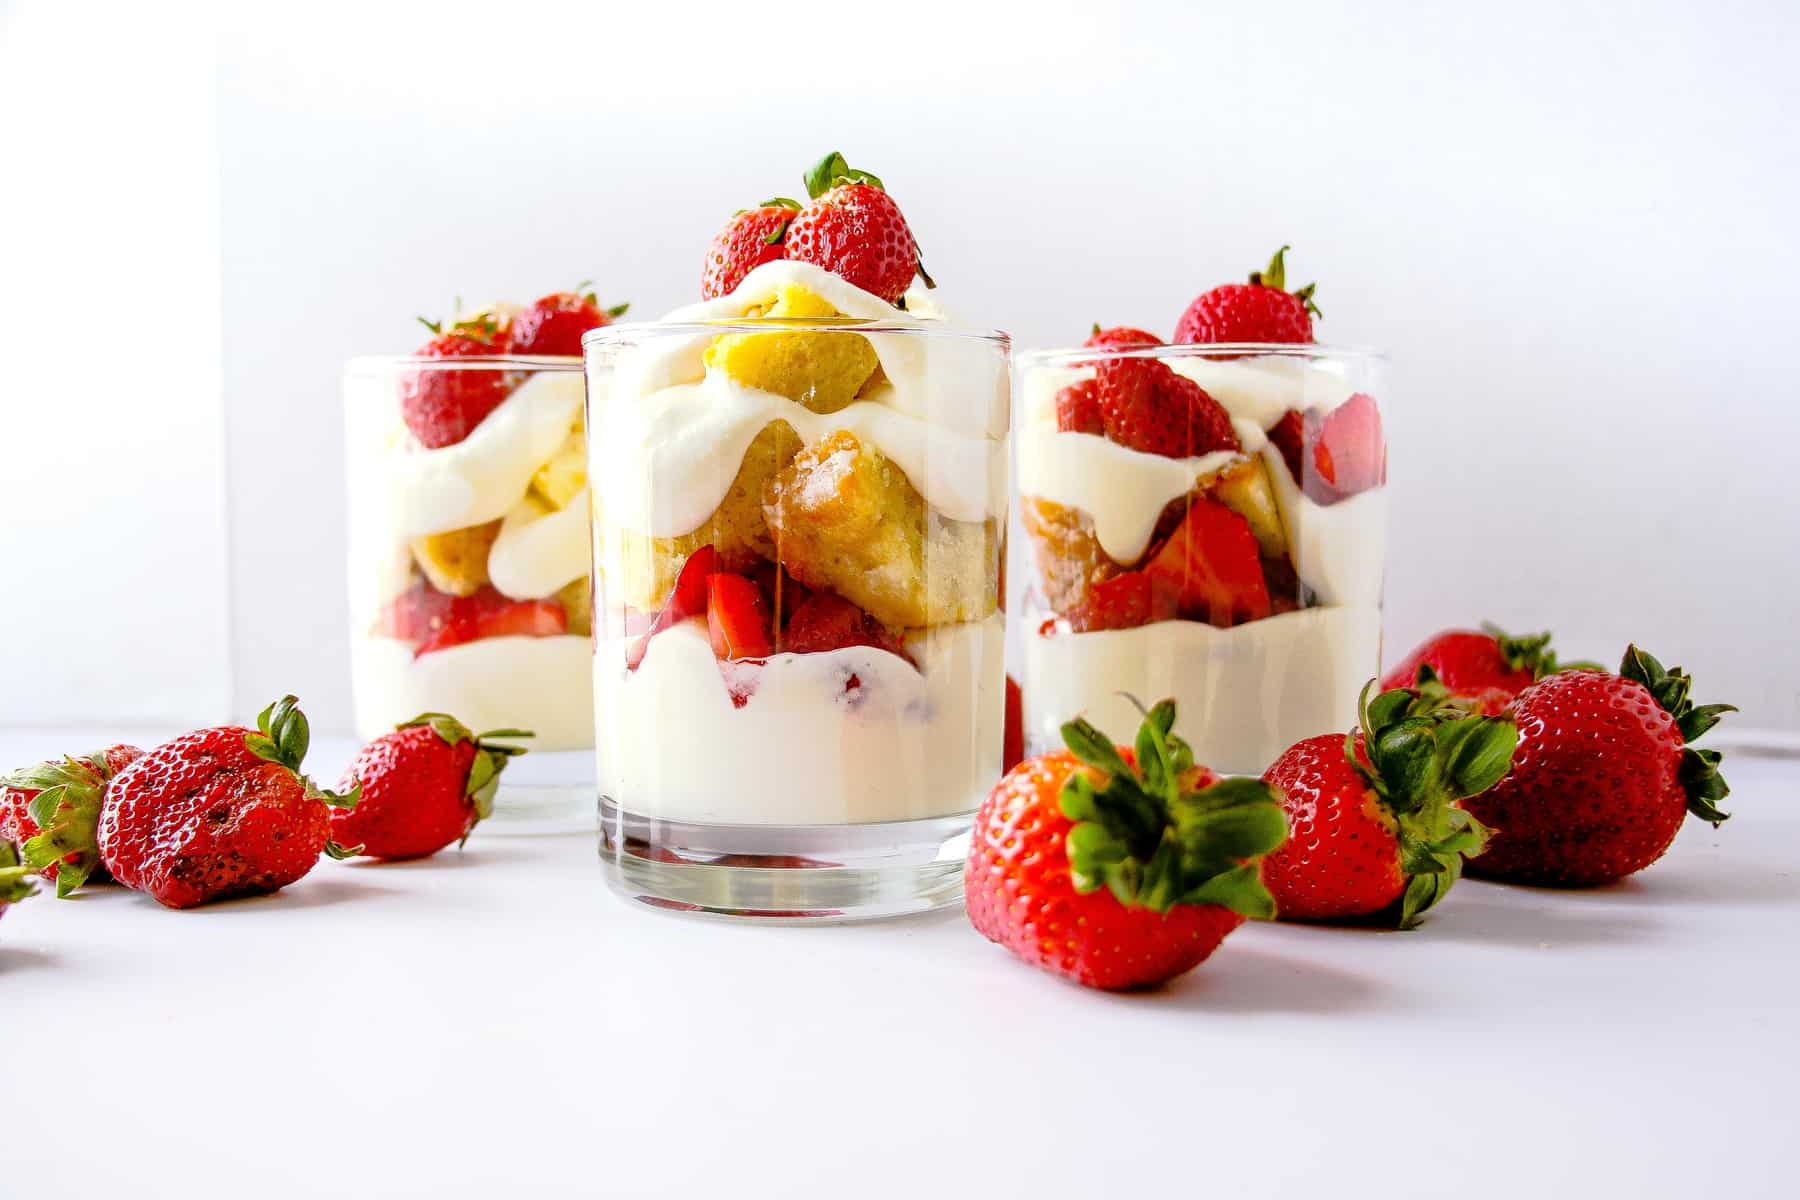 Strawberry shortcake cups layered with pudding, storebought cake, and fresh strawberries